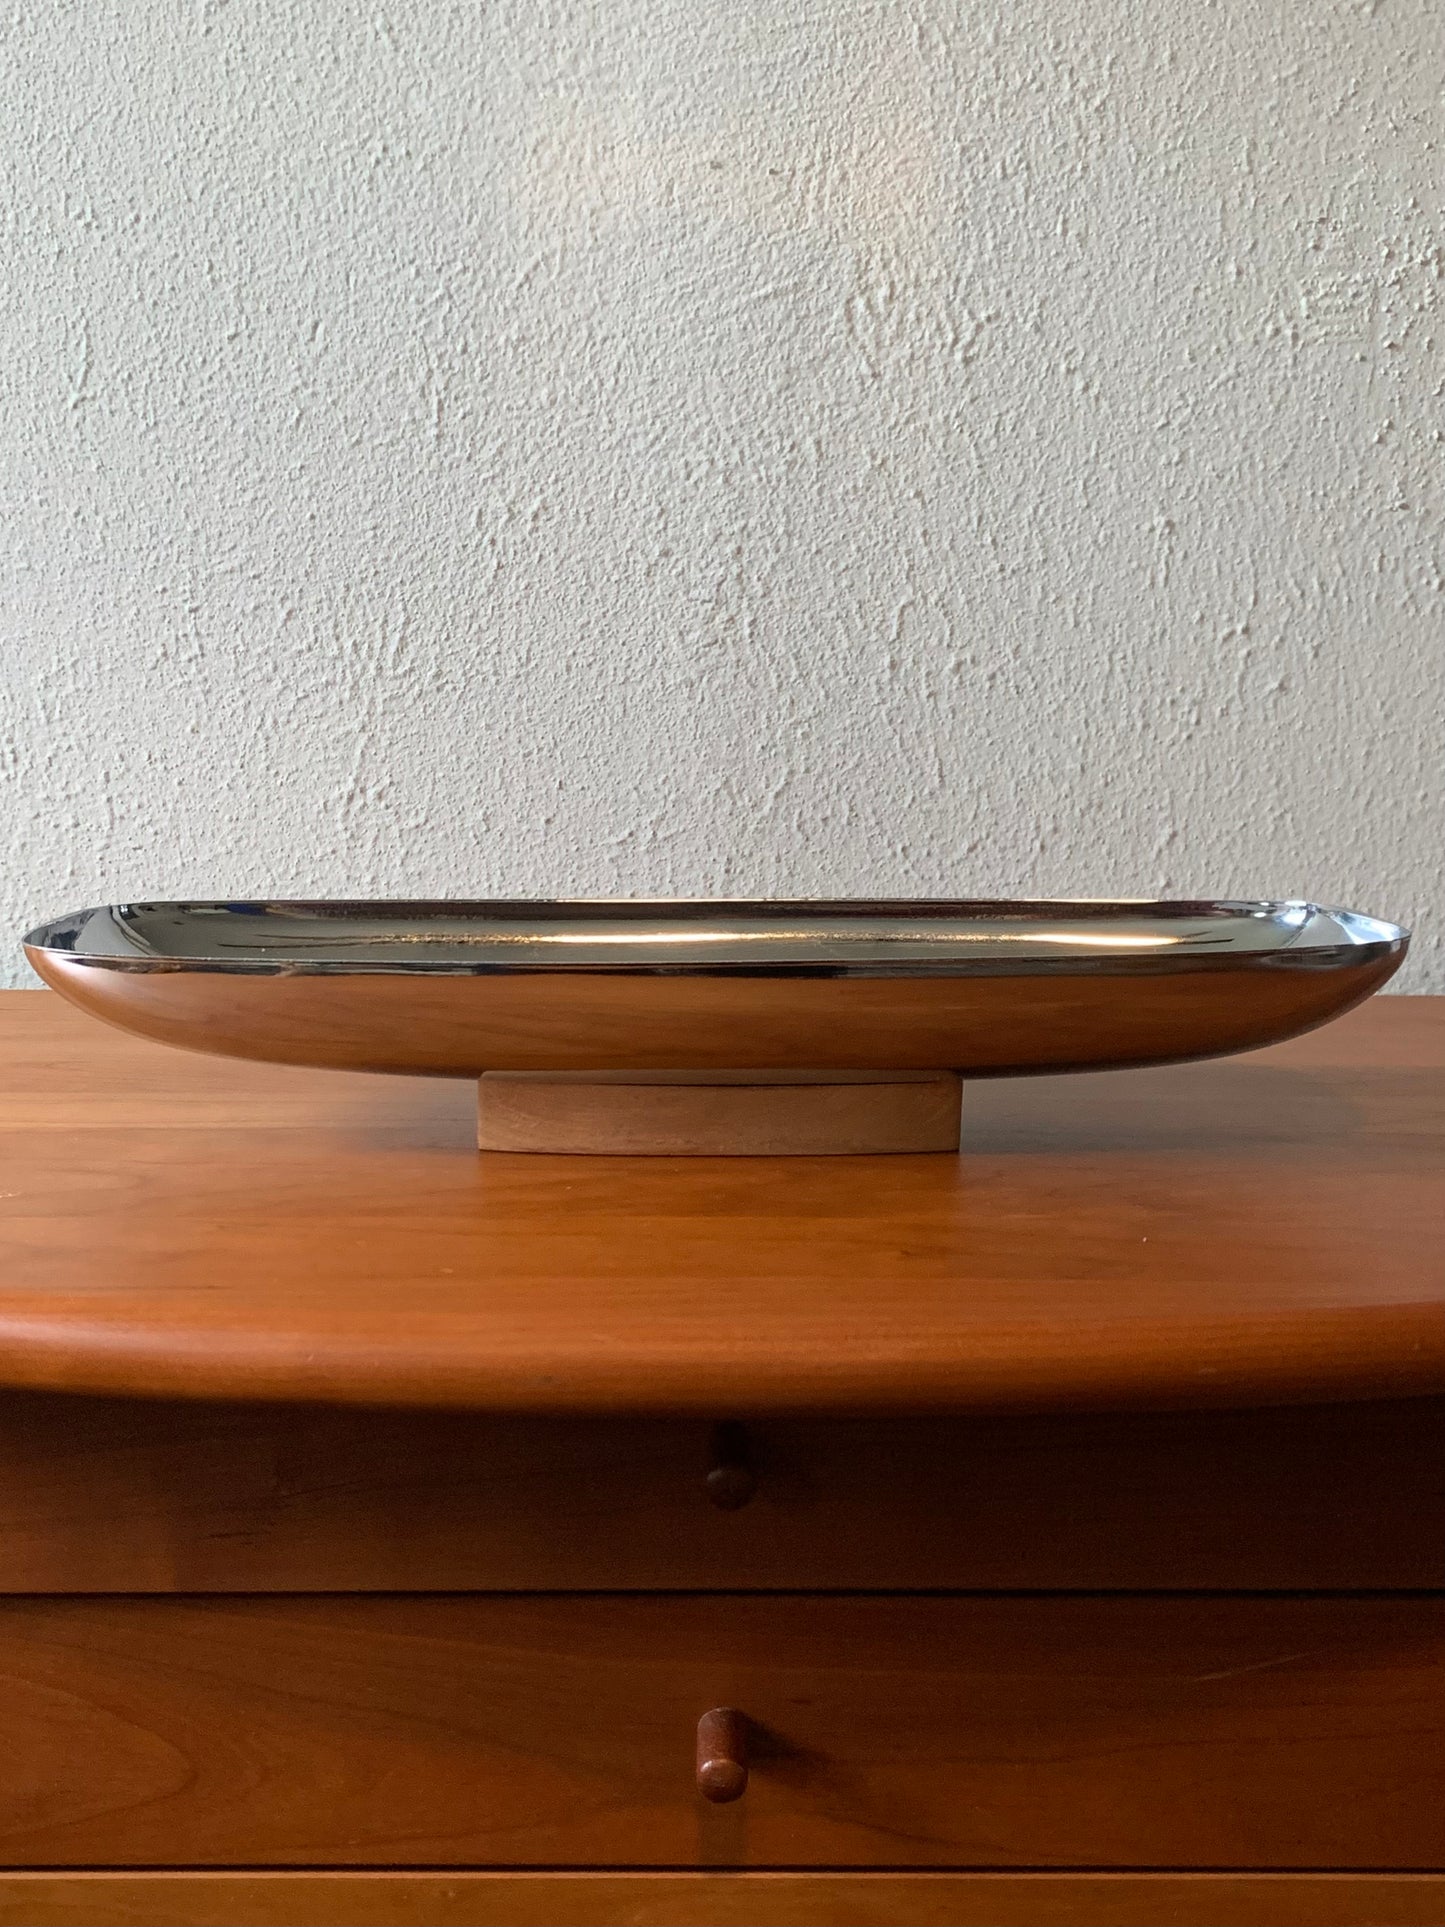 Milbern Silver Oblong Tray on Wood Stand